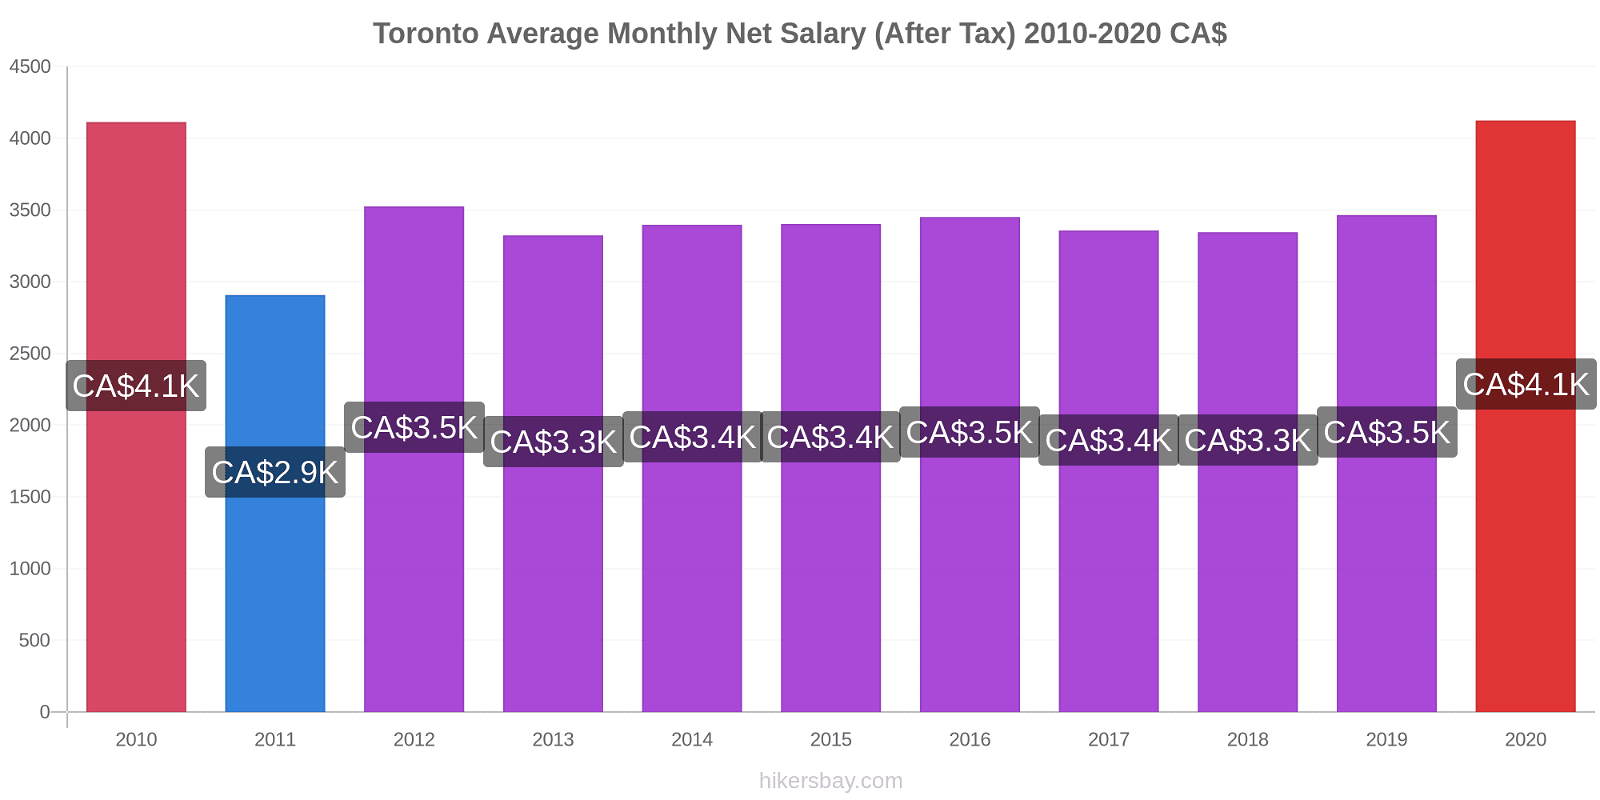 Toronto price changes Average Monthly Net Salary (After Tax) hikersbay.com